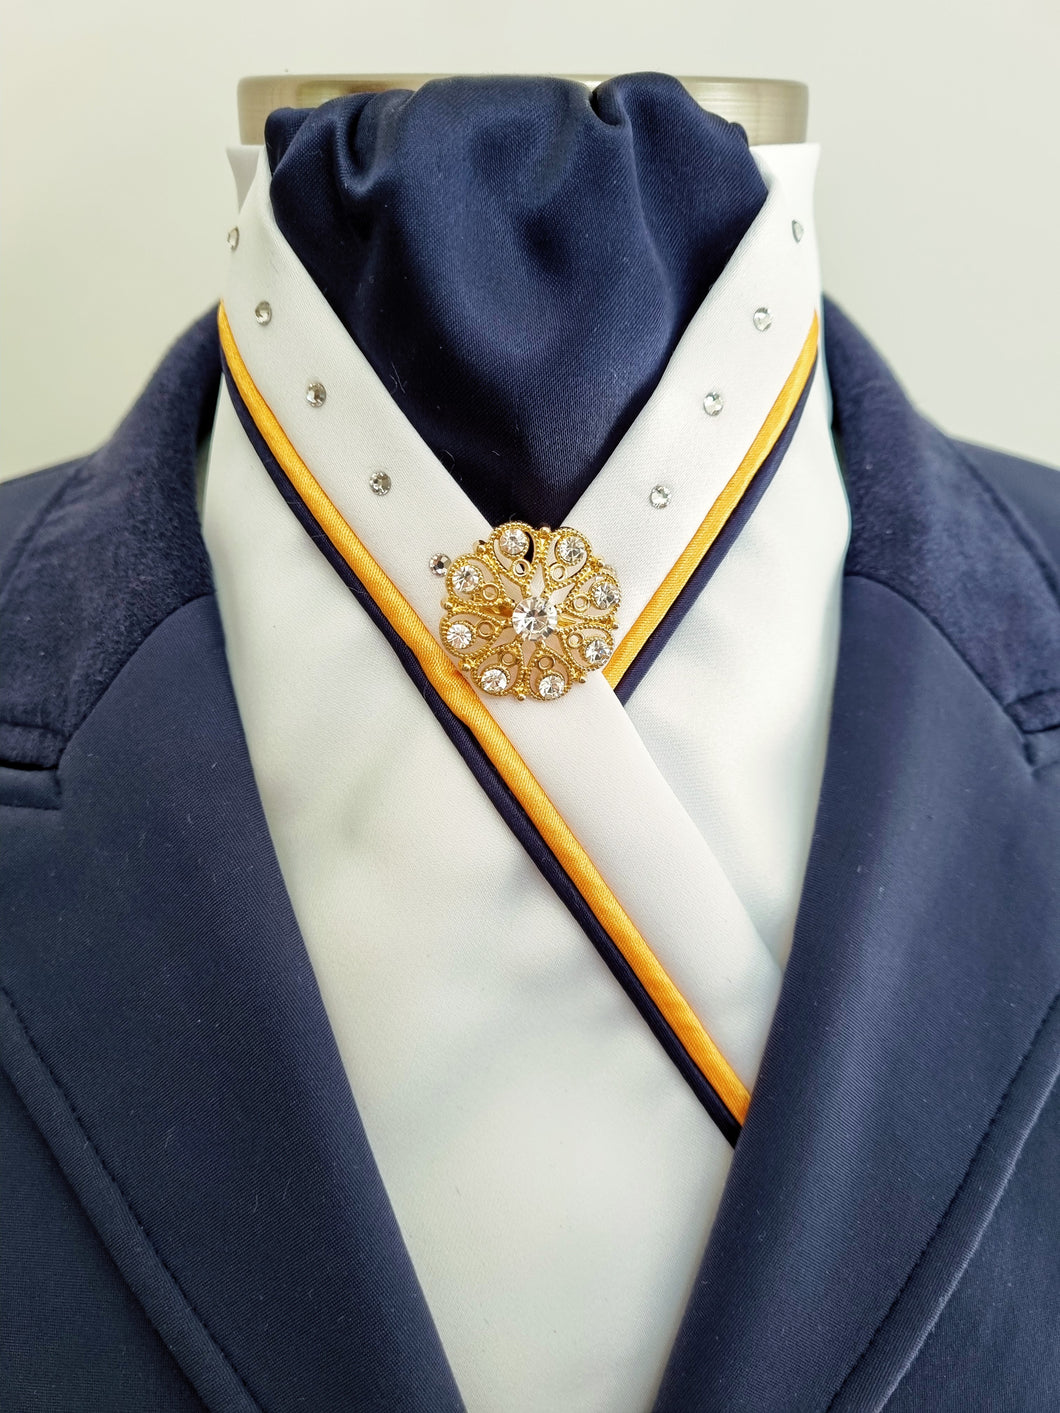 ERA SOPHIE STOCKTIE - White & navy with yellow & navy piping, Swarovski crystals and brooch